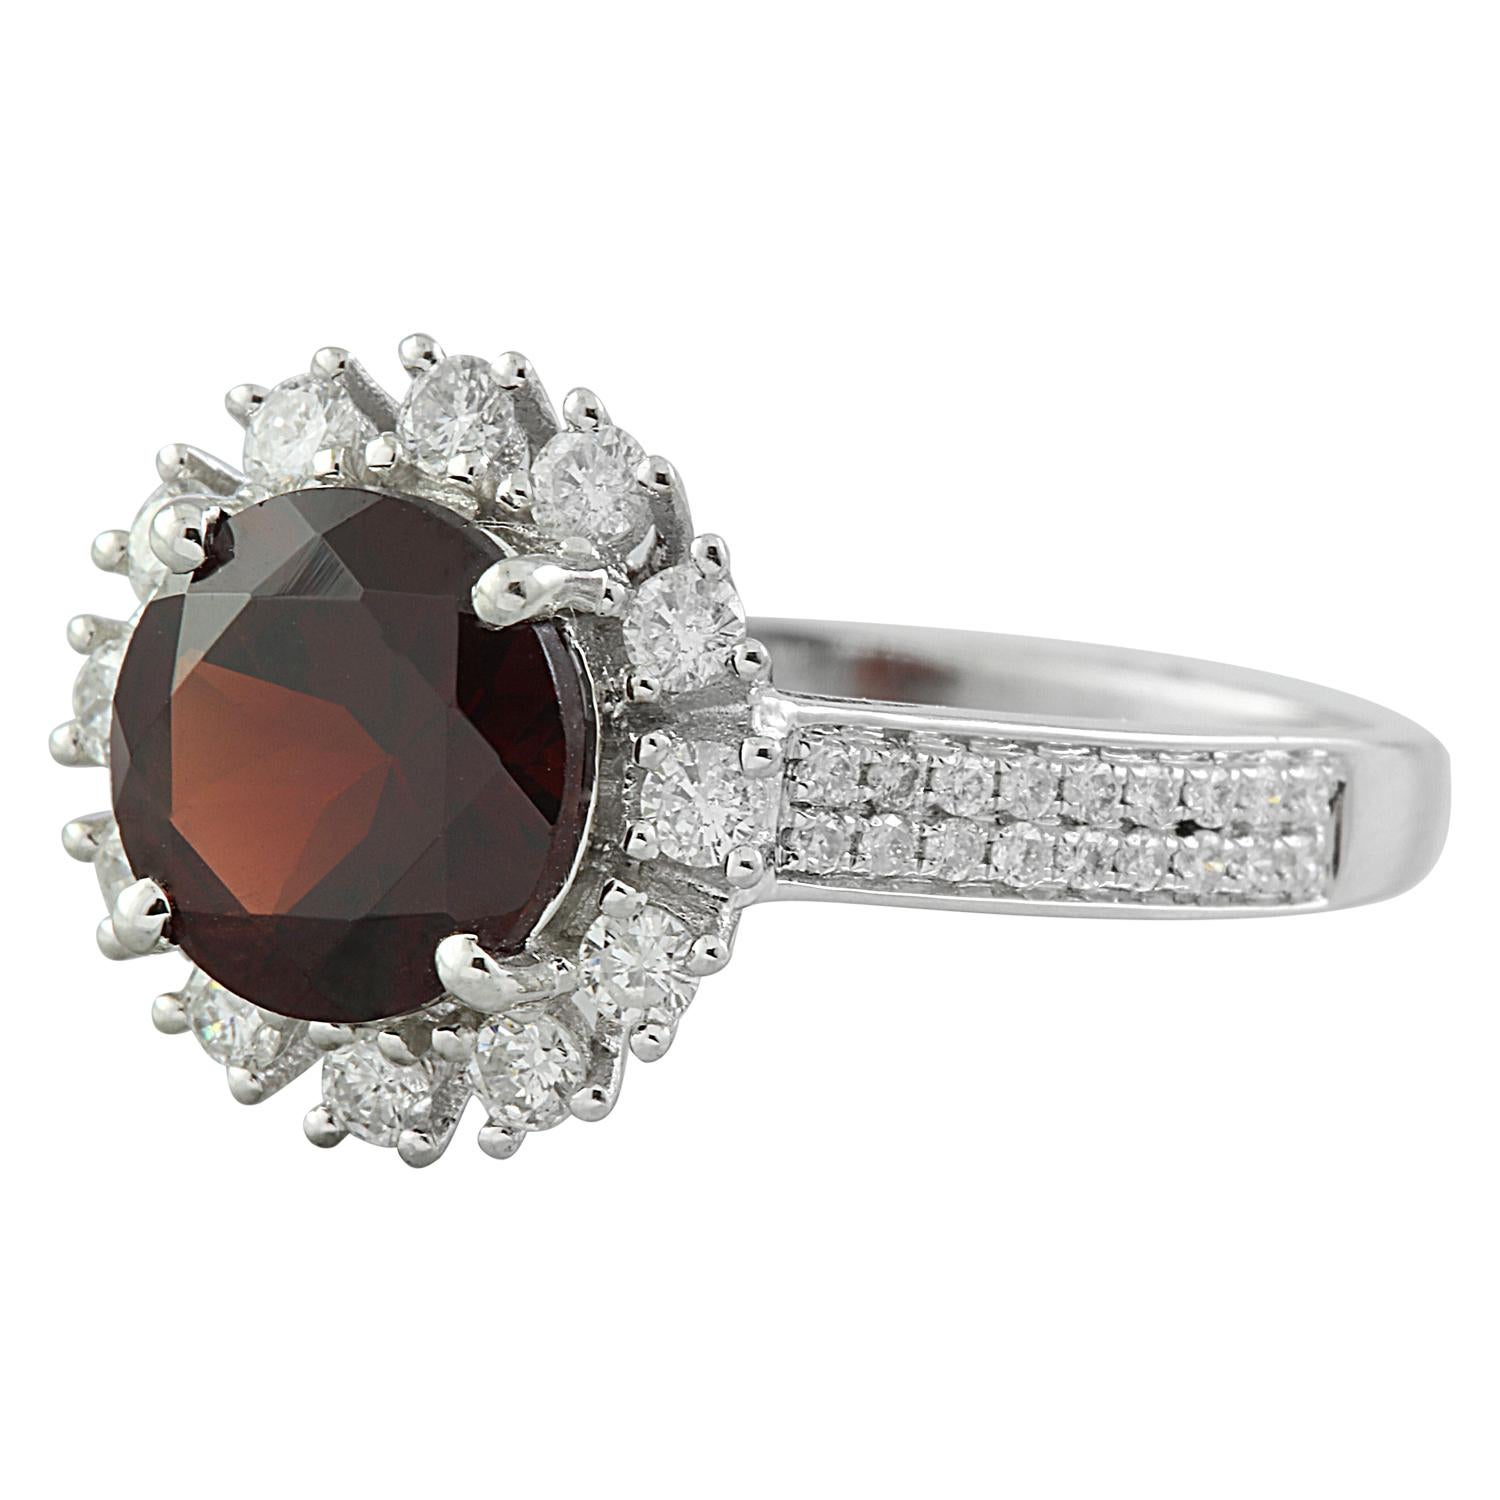 Introducing our exquisite 2.65 Carat Natural Garnet Ring, masterfully crafted in luxurious 14K Solid White Gold. Authenticated with a stamped mark of 14K and weighs a total of 2.8 grams, ensuring both elegance and durability. At its core gleams a